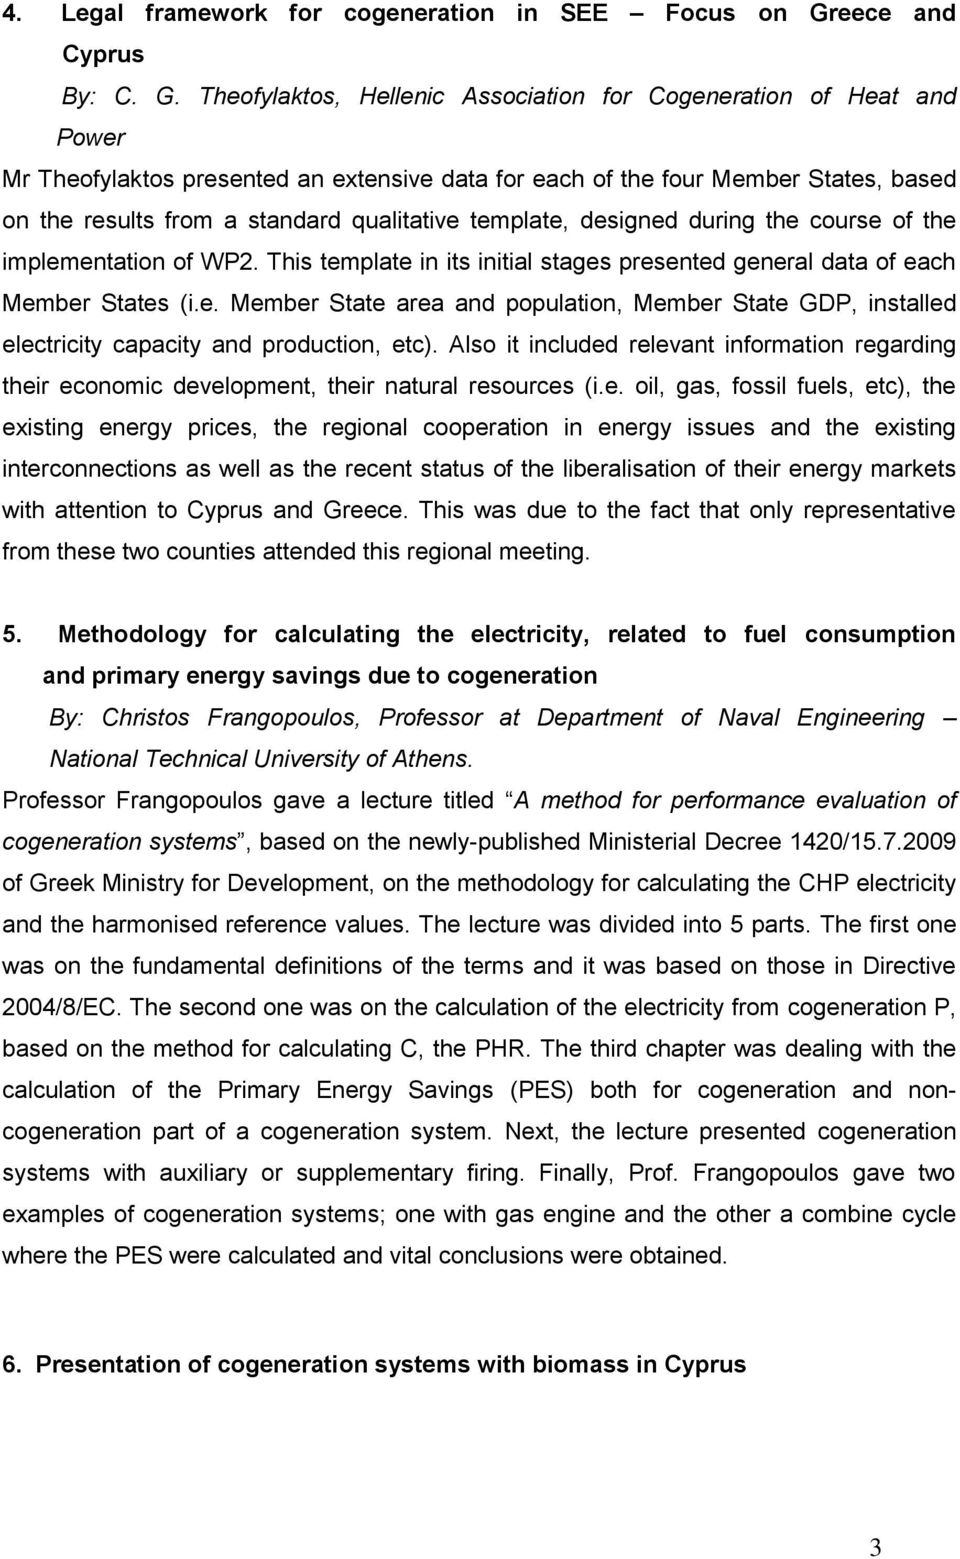 Theofylaktos, Hellenic Association for Cogeneration of Heat and Power Mr Theofylaktos presented an extensive data for each of the four Member States, based on the results from a standard qualitative